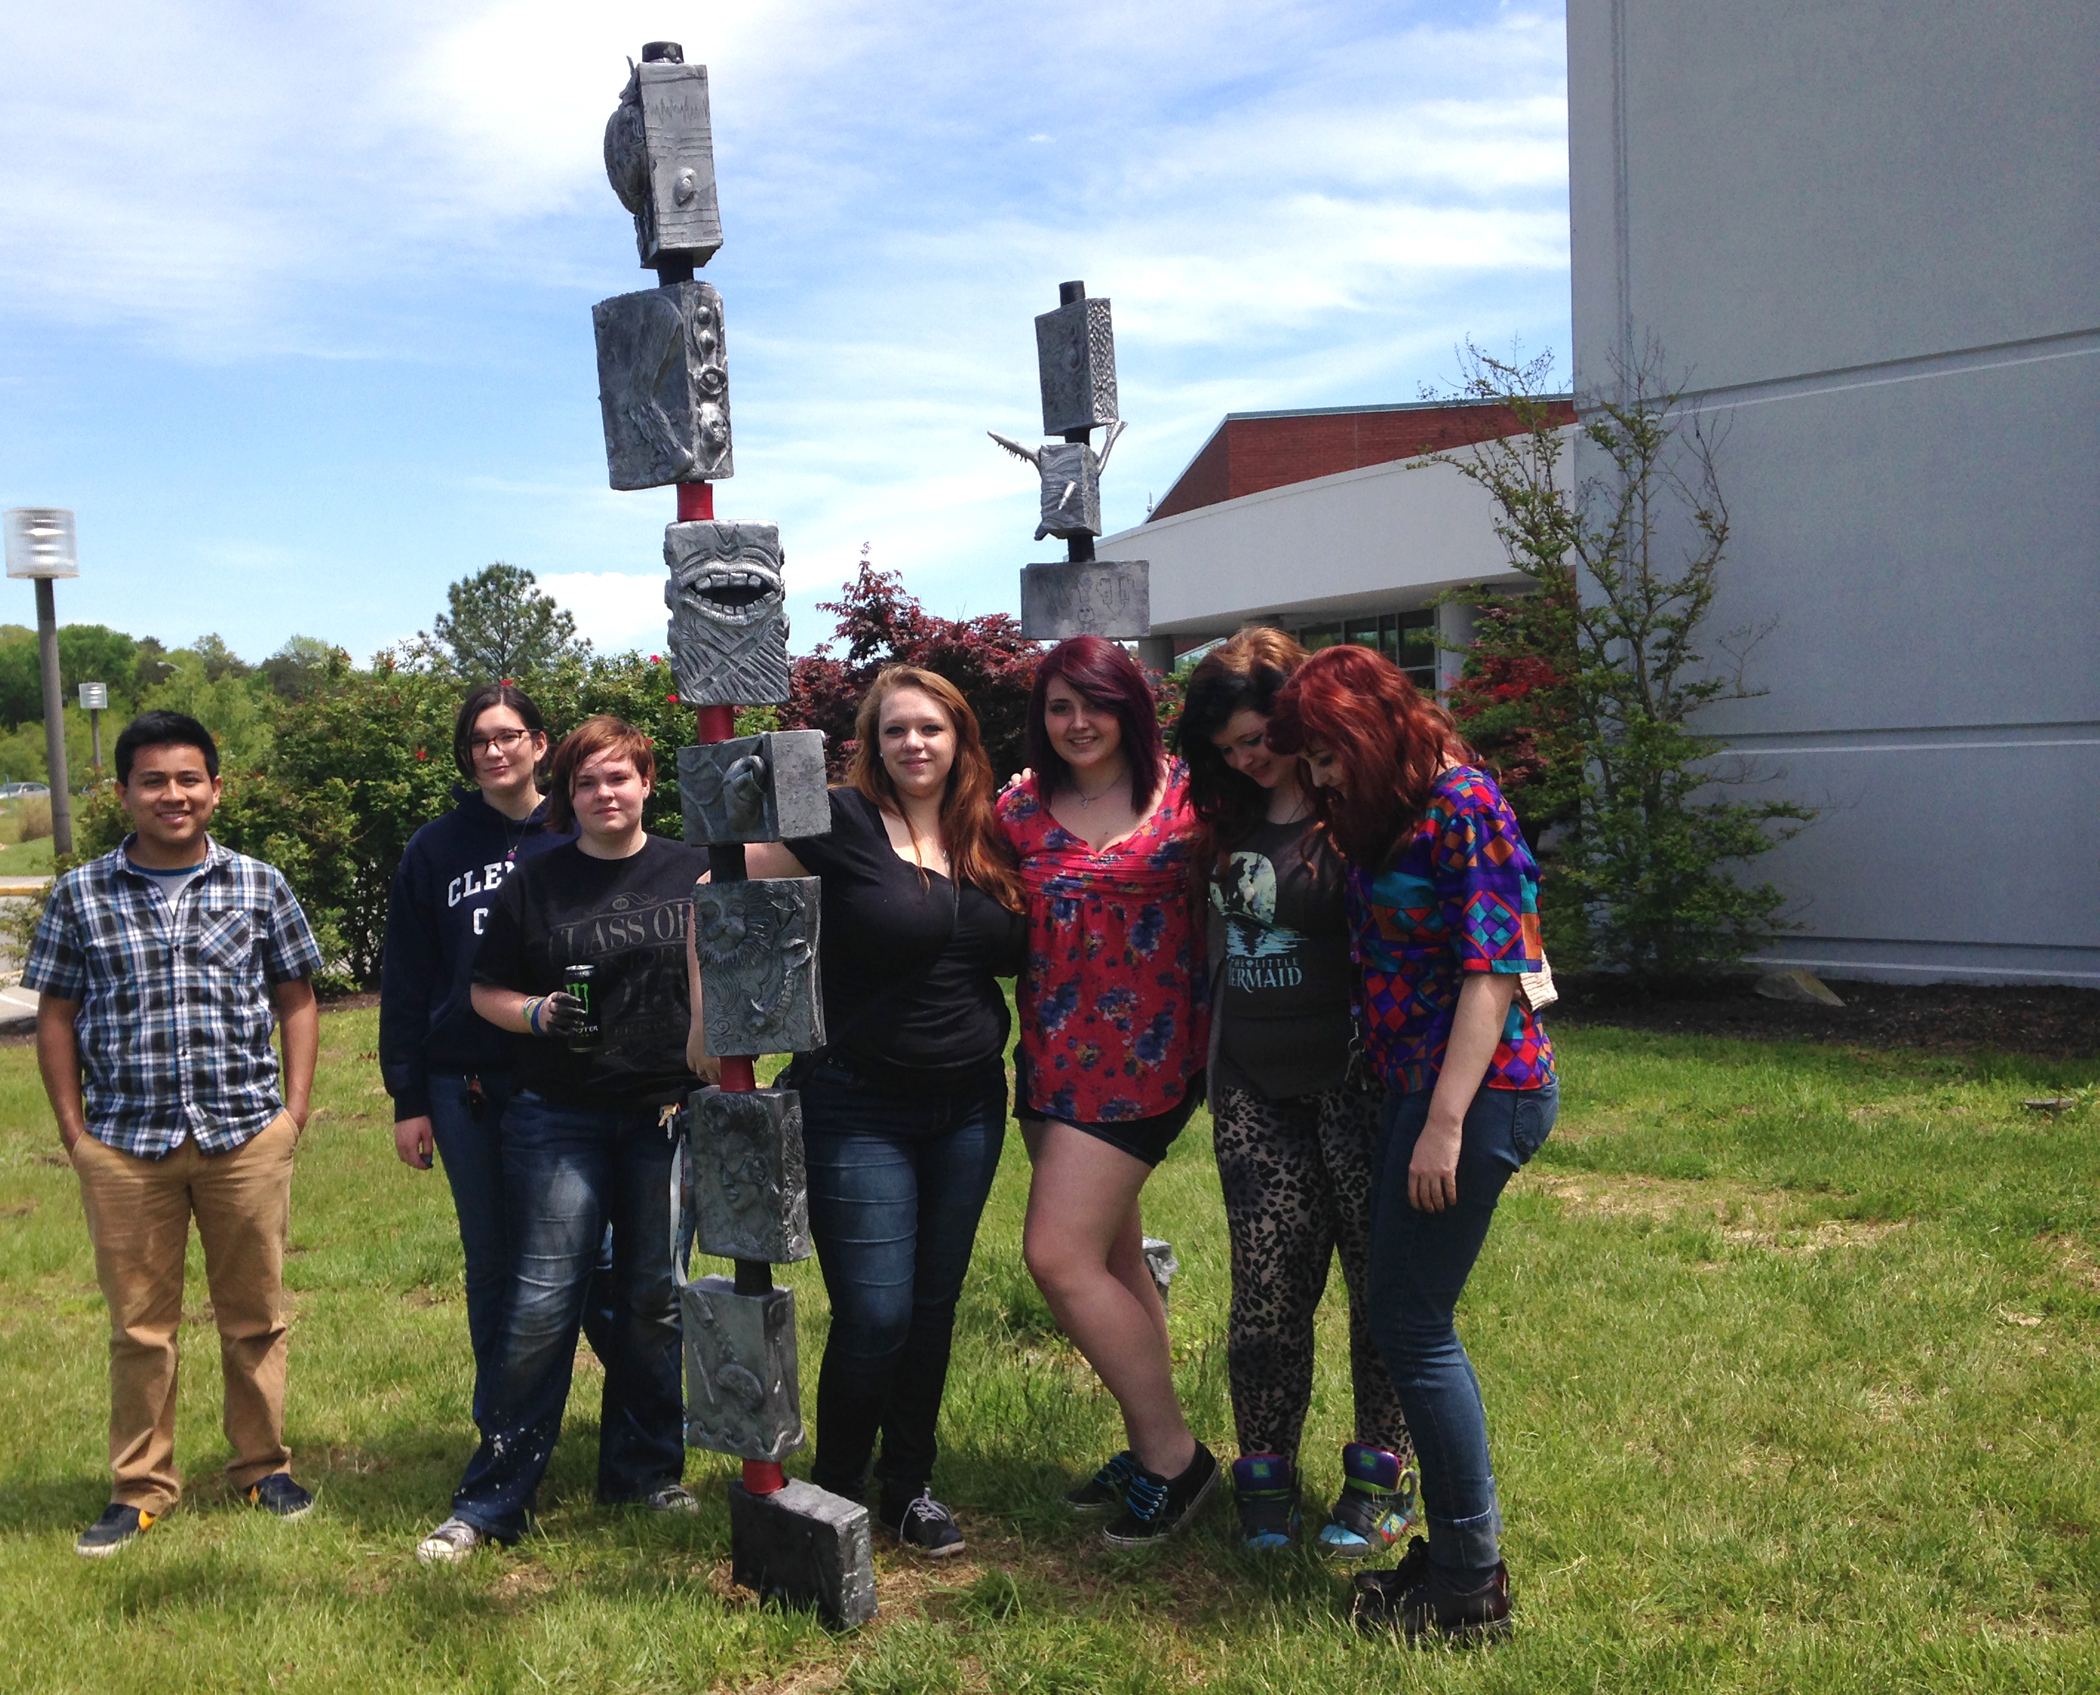  Oak Ridge High School ceramics students and Roane State art students collaborated to create a sculpture on display at the college’s Oak Ridge campus. From left are Kevin Rodriguez, Moire Gabor, Liv Shepherd, Skyelar Bryson, Ceara Wallus, Katie Stewart and Miranda Conger